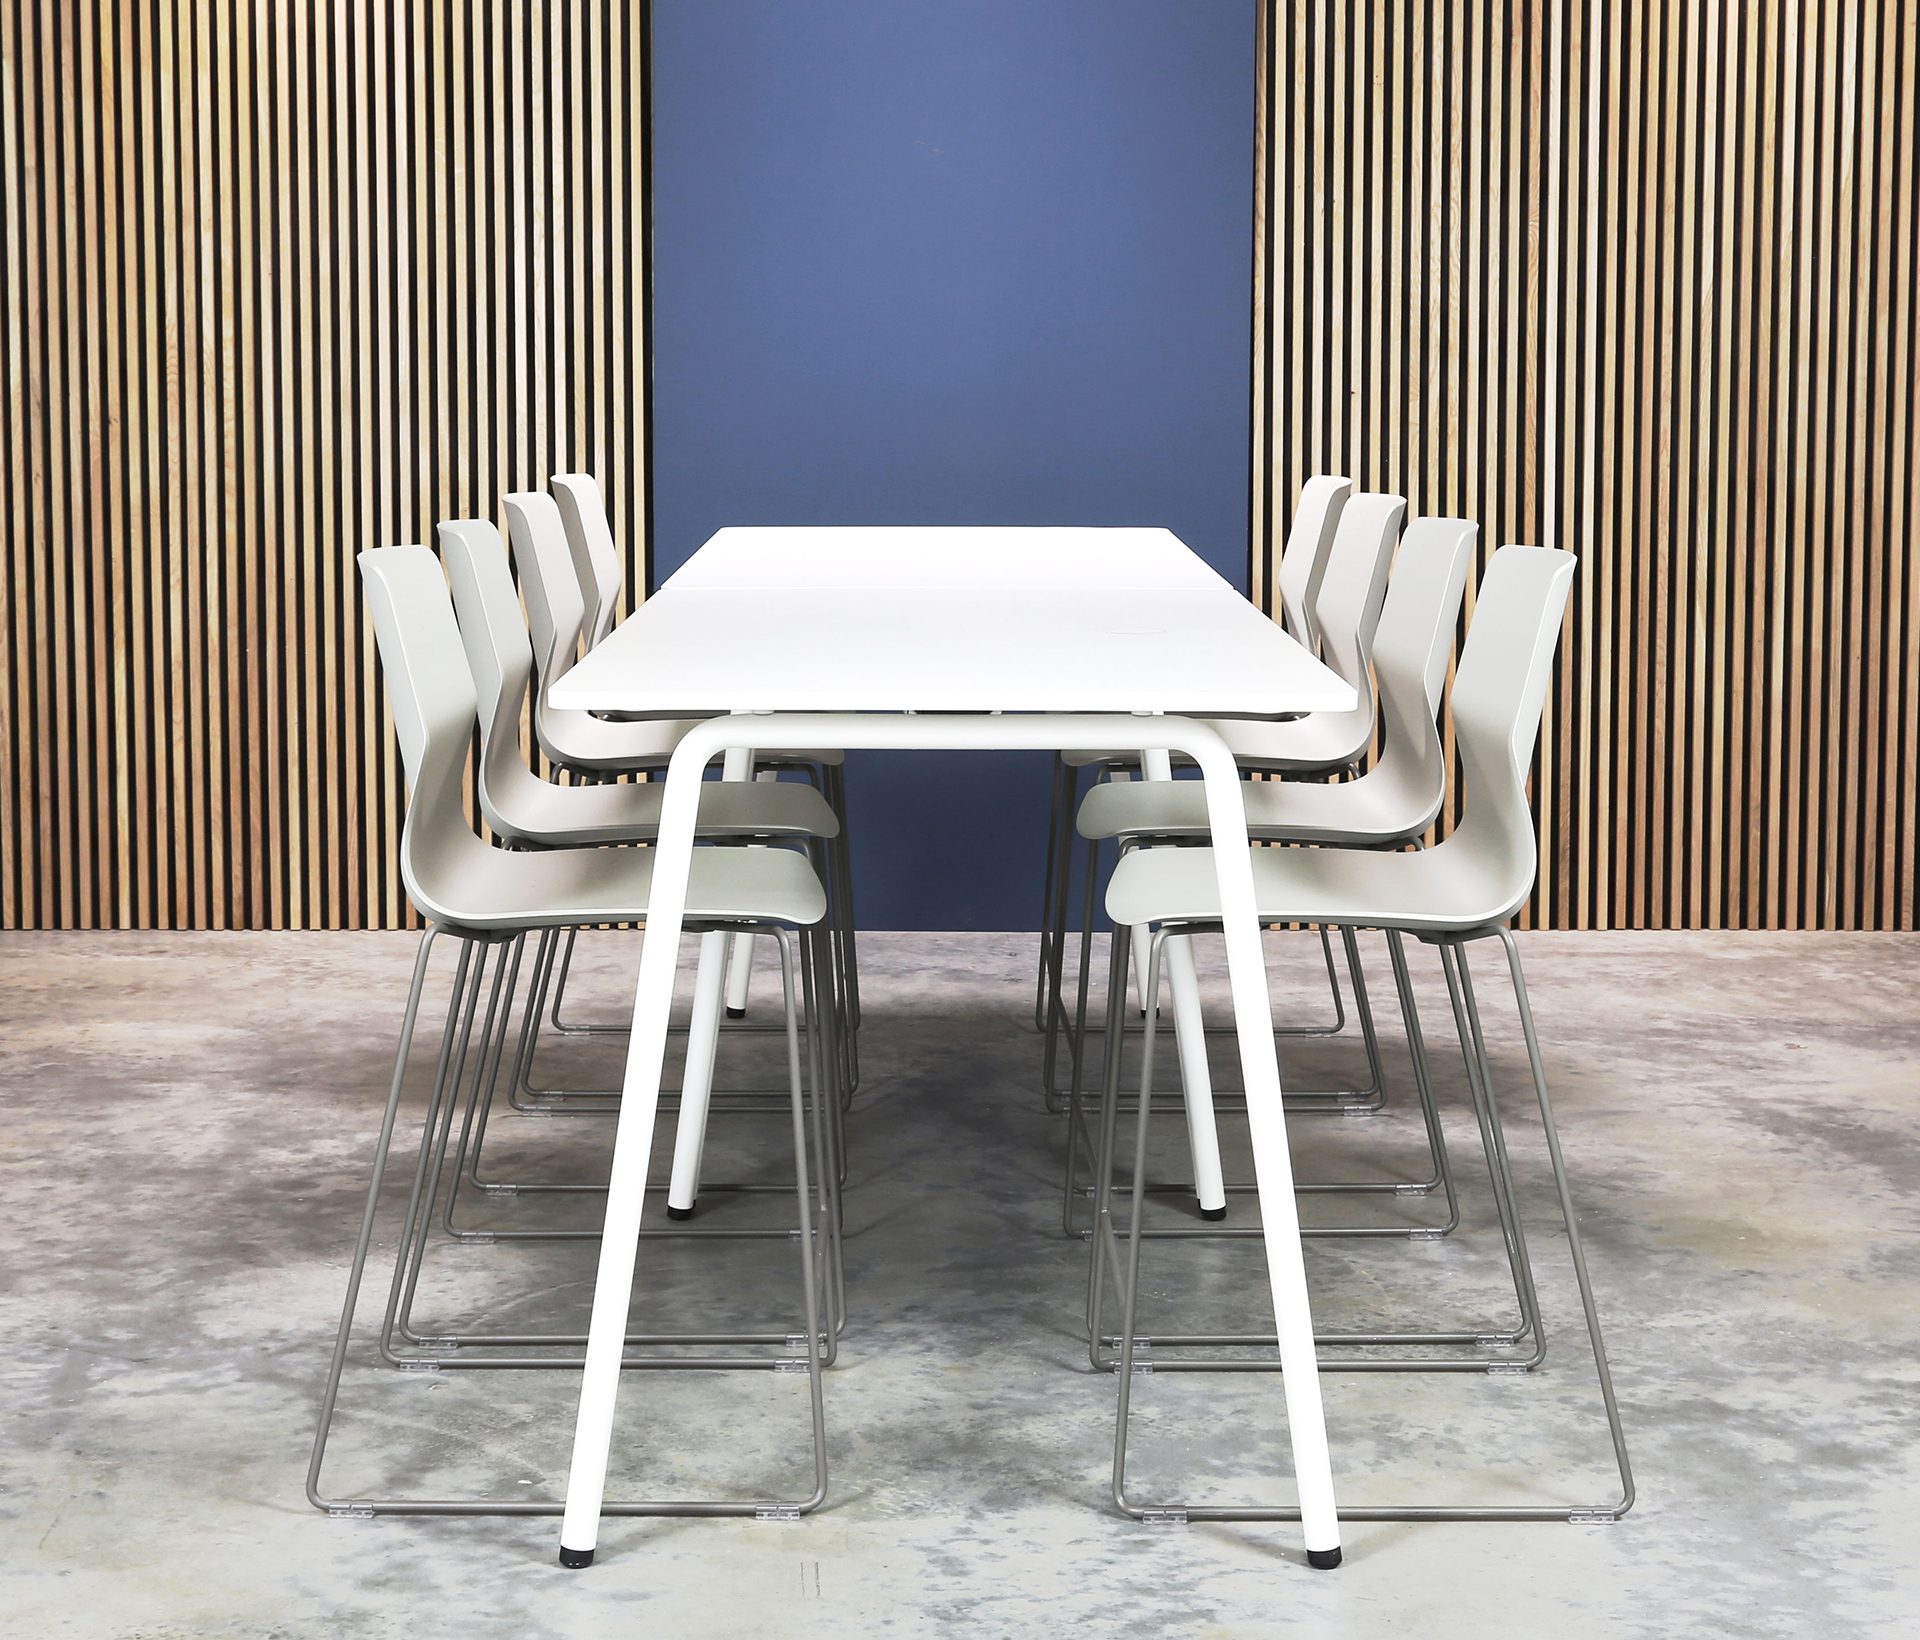 A white standing height tables and chairs in front of a wooden wall.